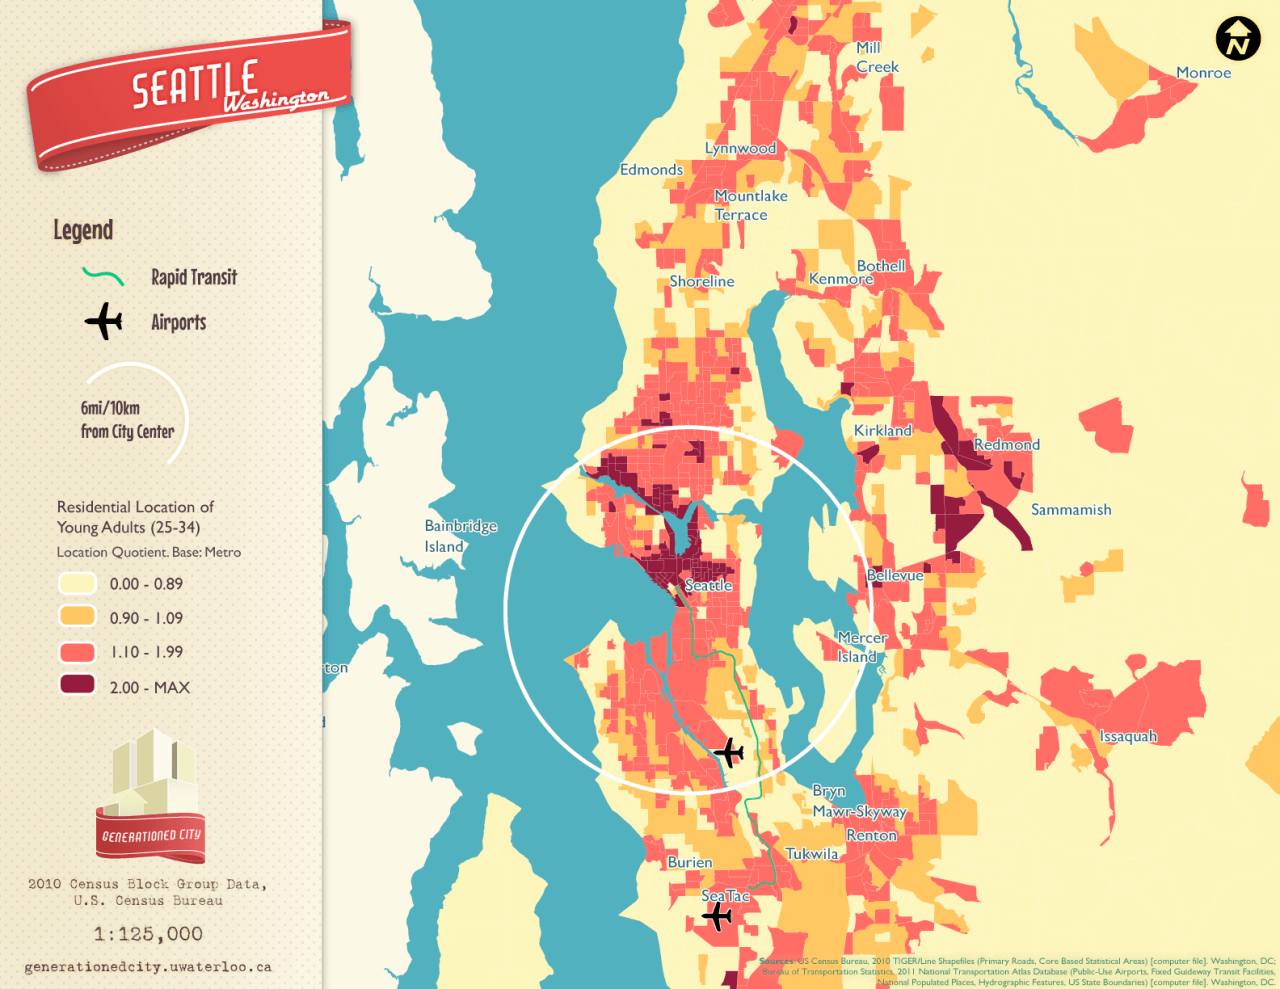 Residential location of young adults in Seattle.